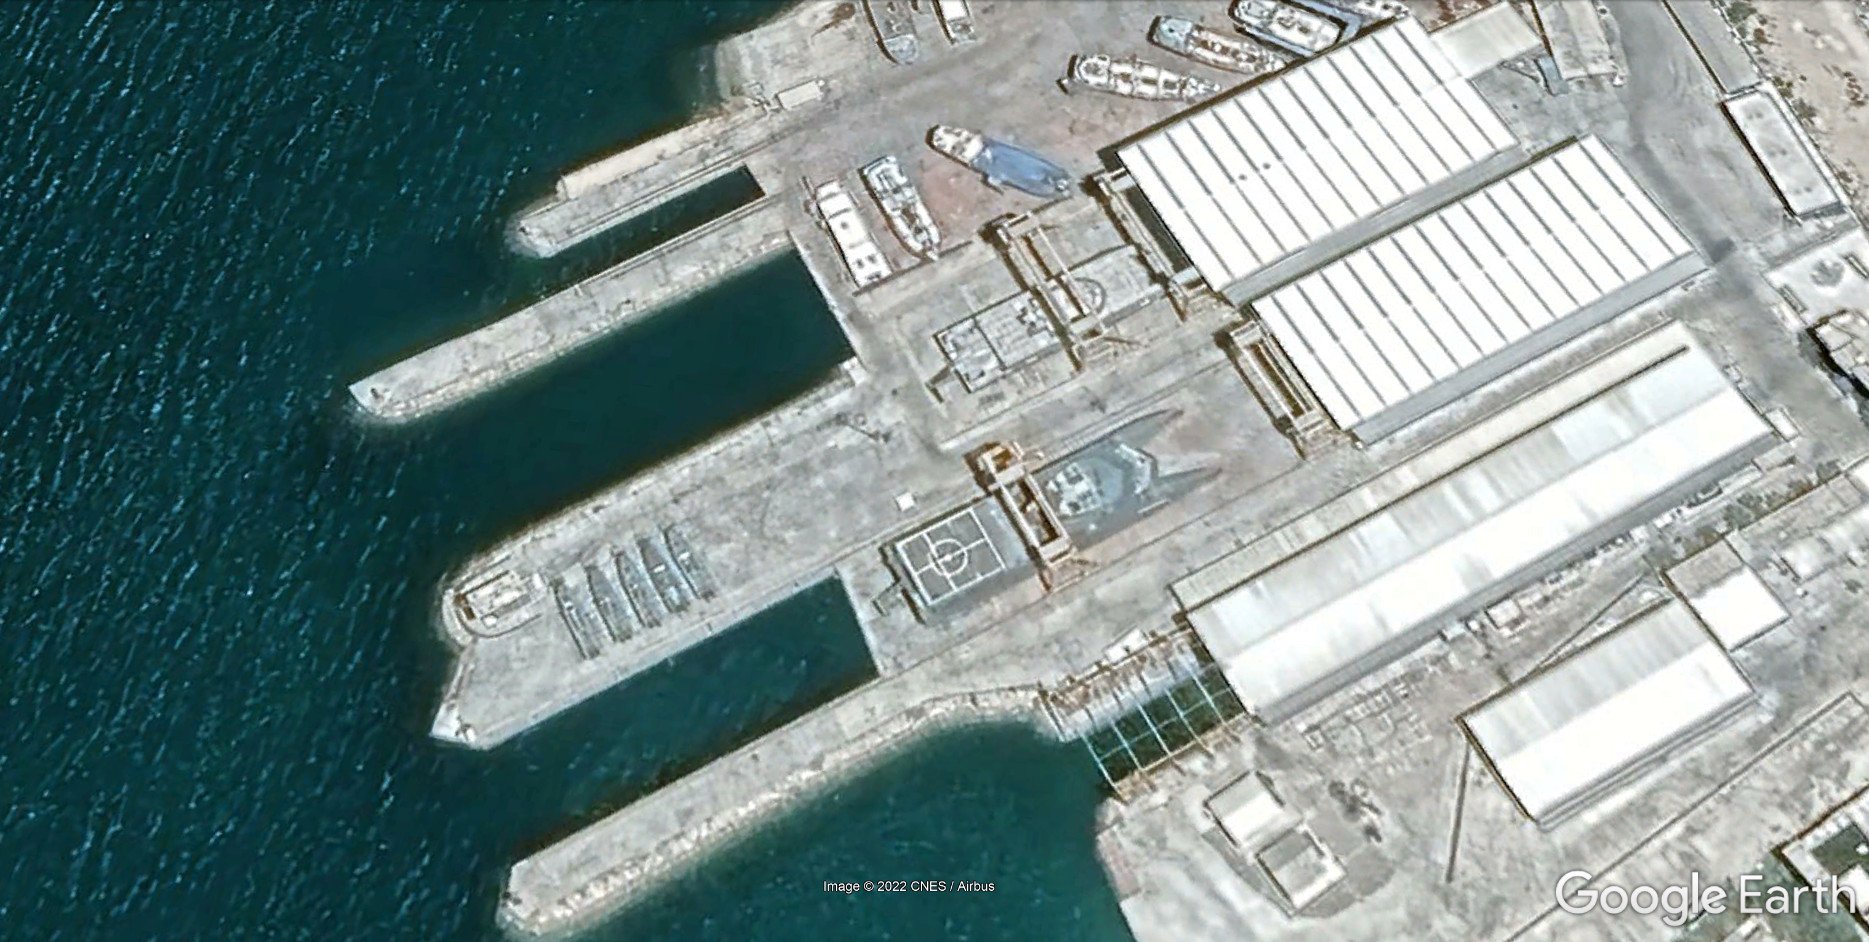 Satellite images reveal new Iranian "ghost boat" under construction